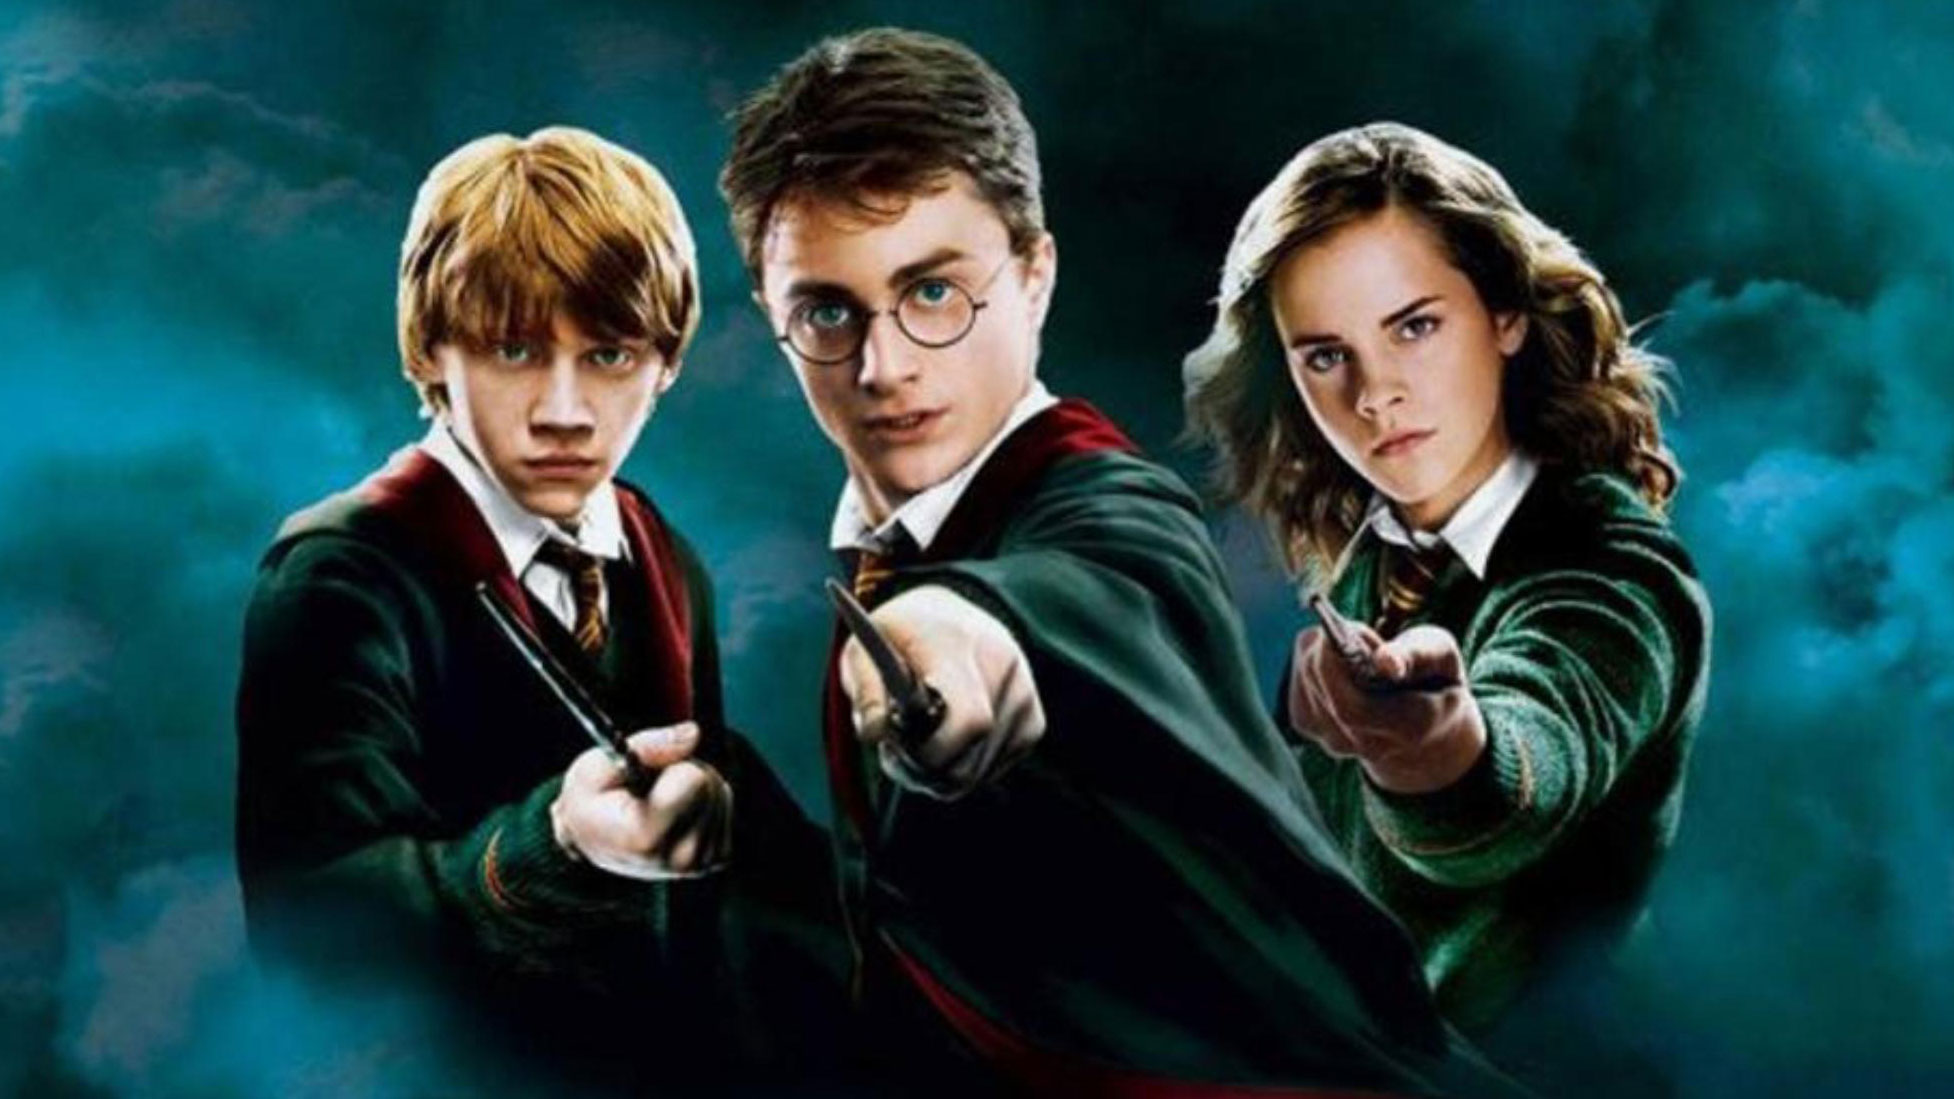 Best Harry Potter movies ranked - Harry, Hermione and Ron